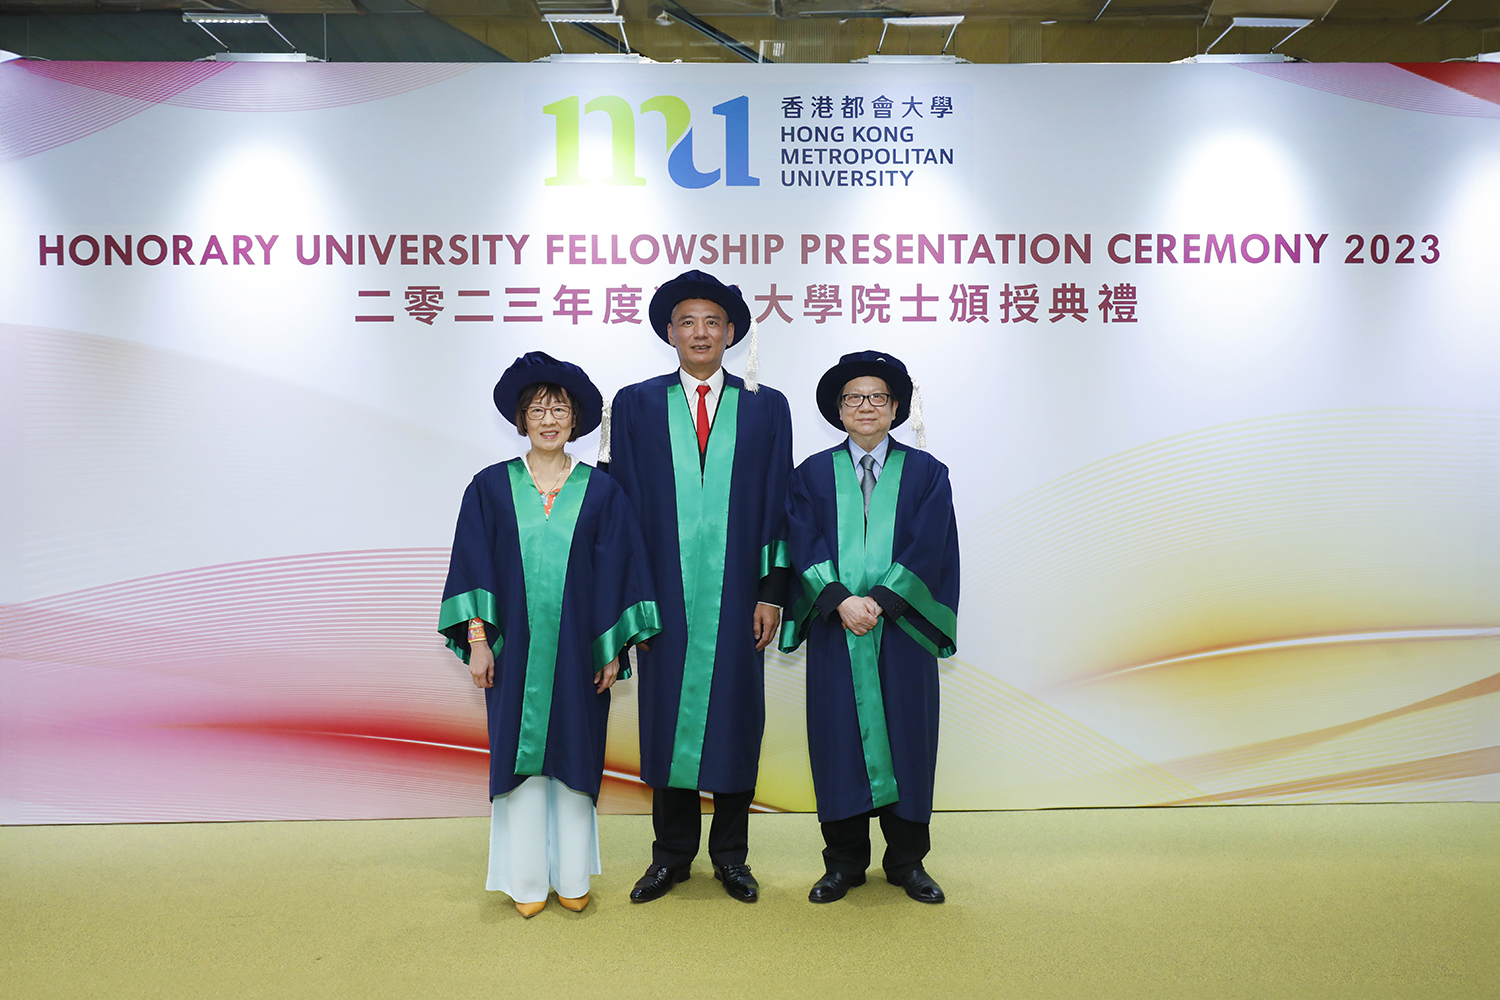 Three Honorary University Fellows (from left): Ms Yvonne Choi Ying-pik, Dr Chung Wai-ping, and Mr Raymond To Kwok-wai.